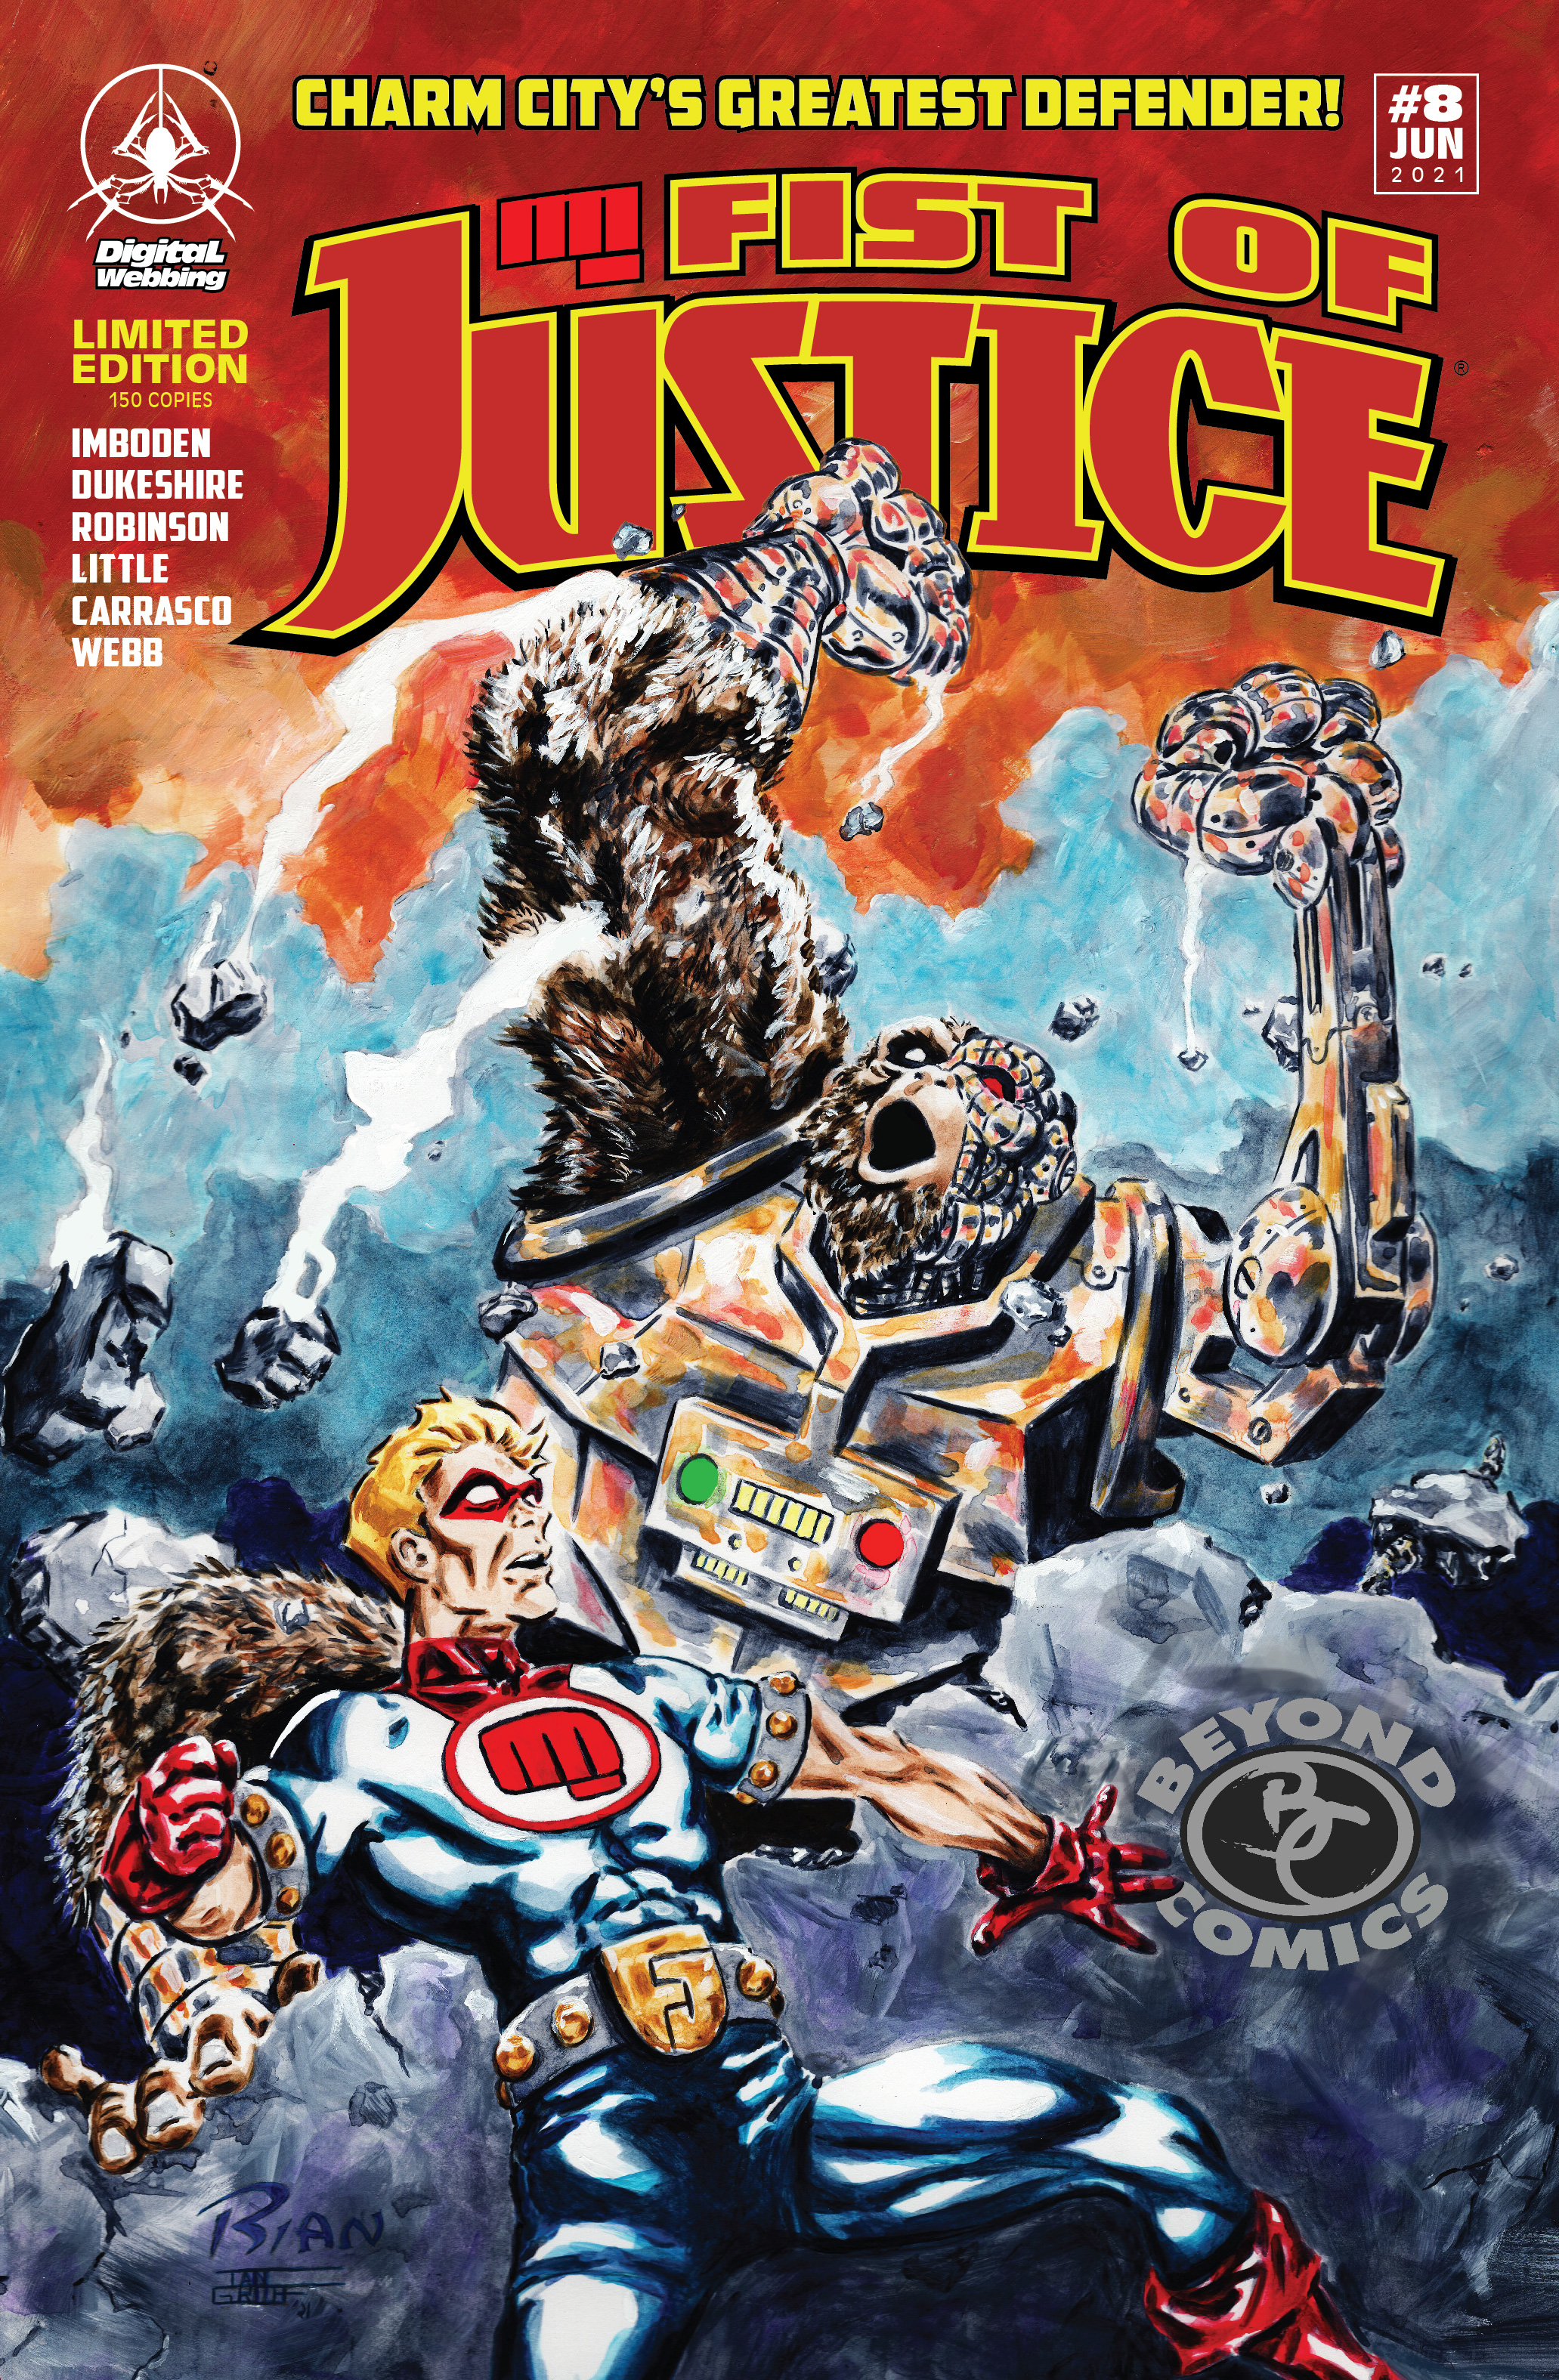 Fist of Justice Monkey Business Beyond Comics Store Variant